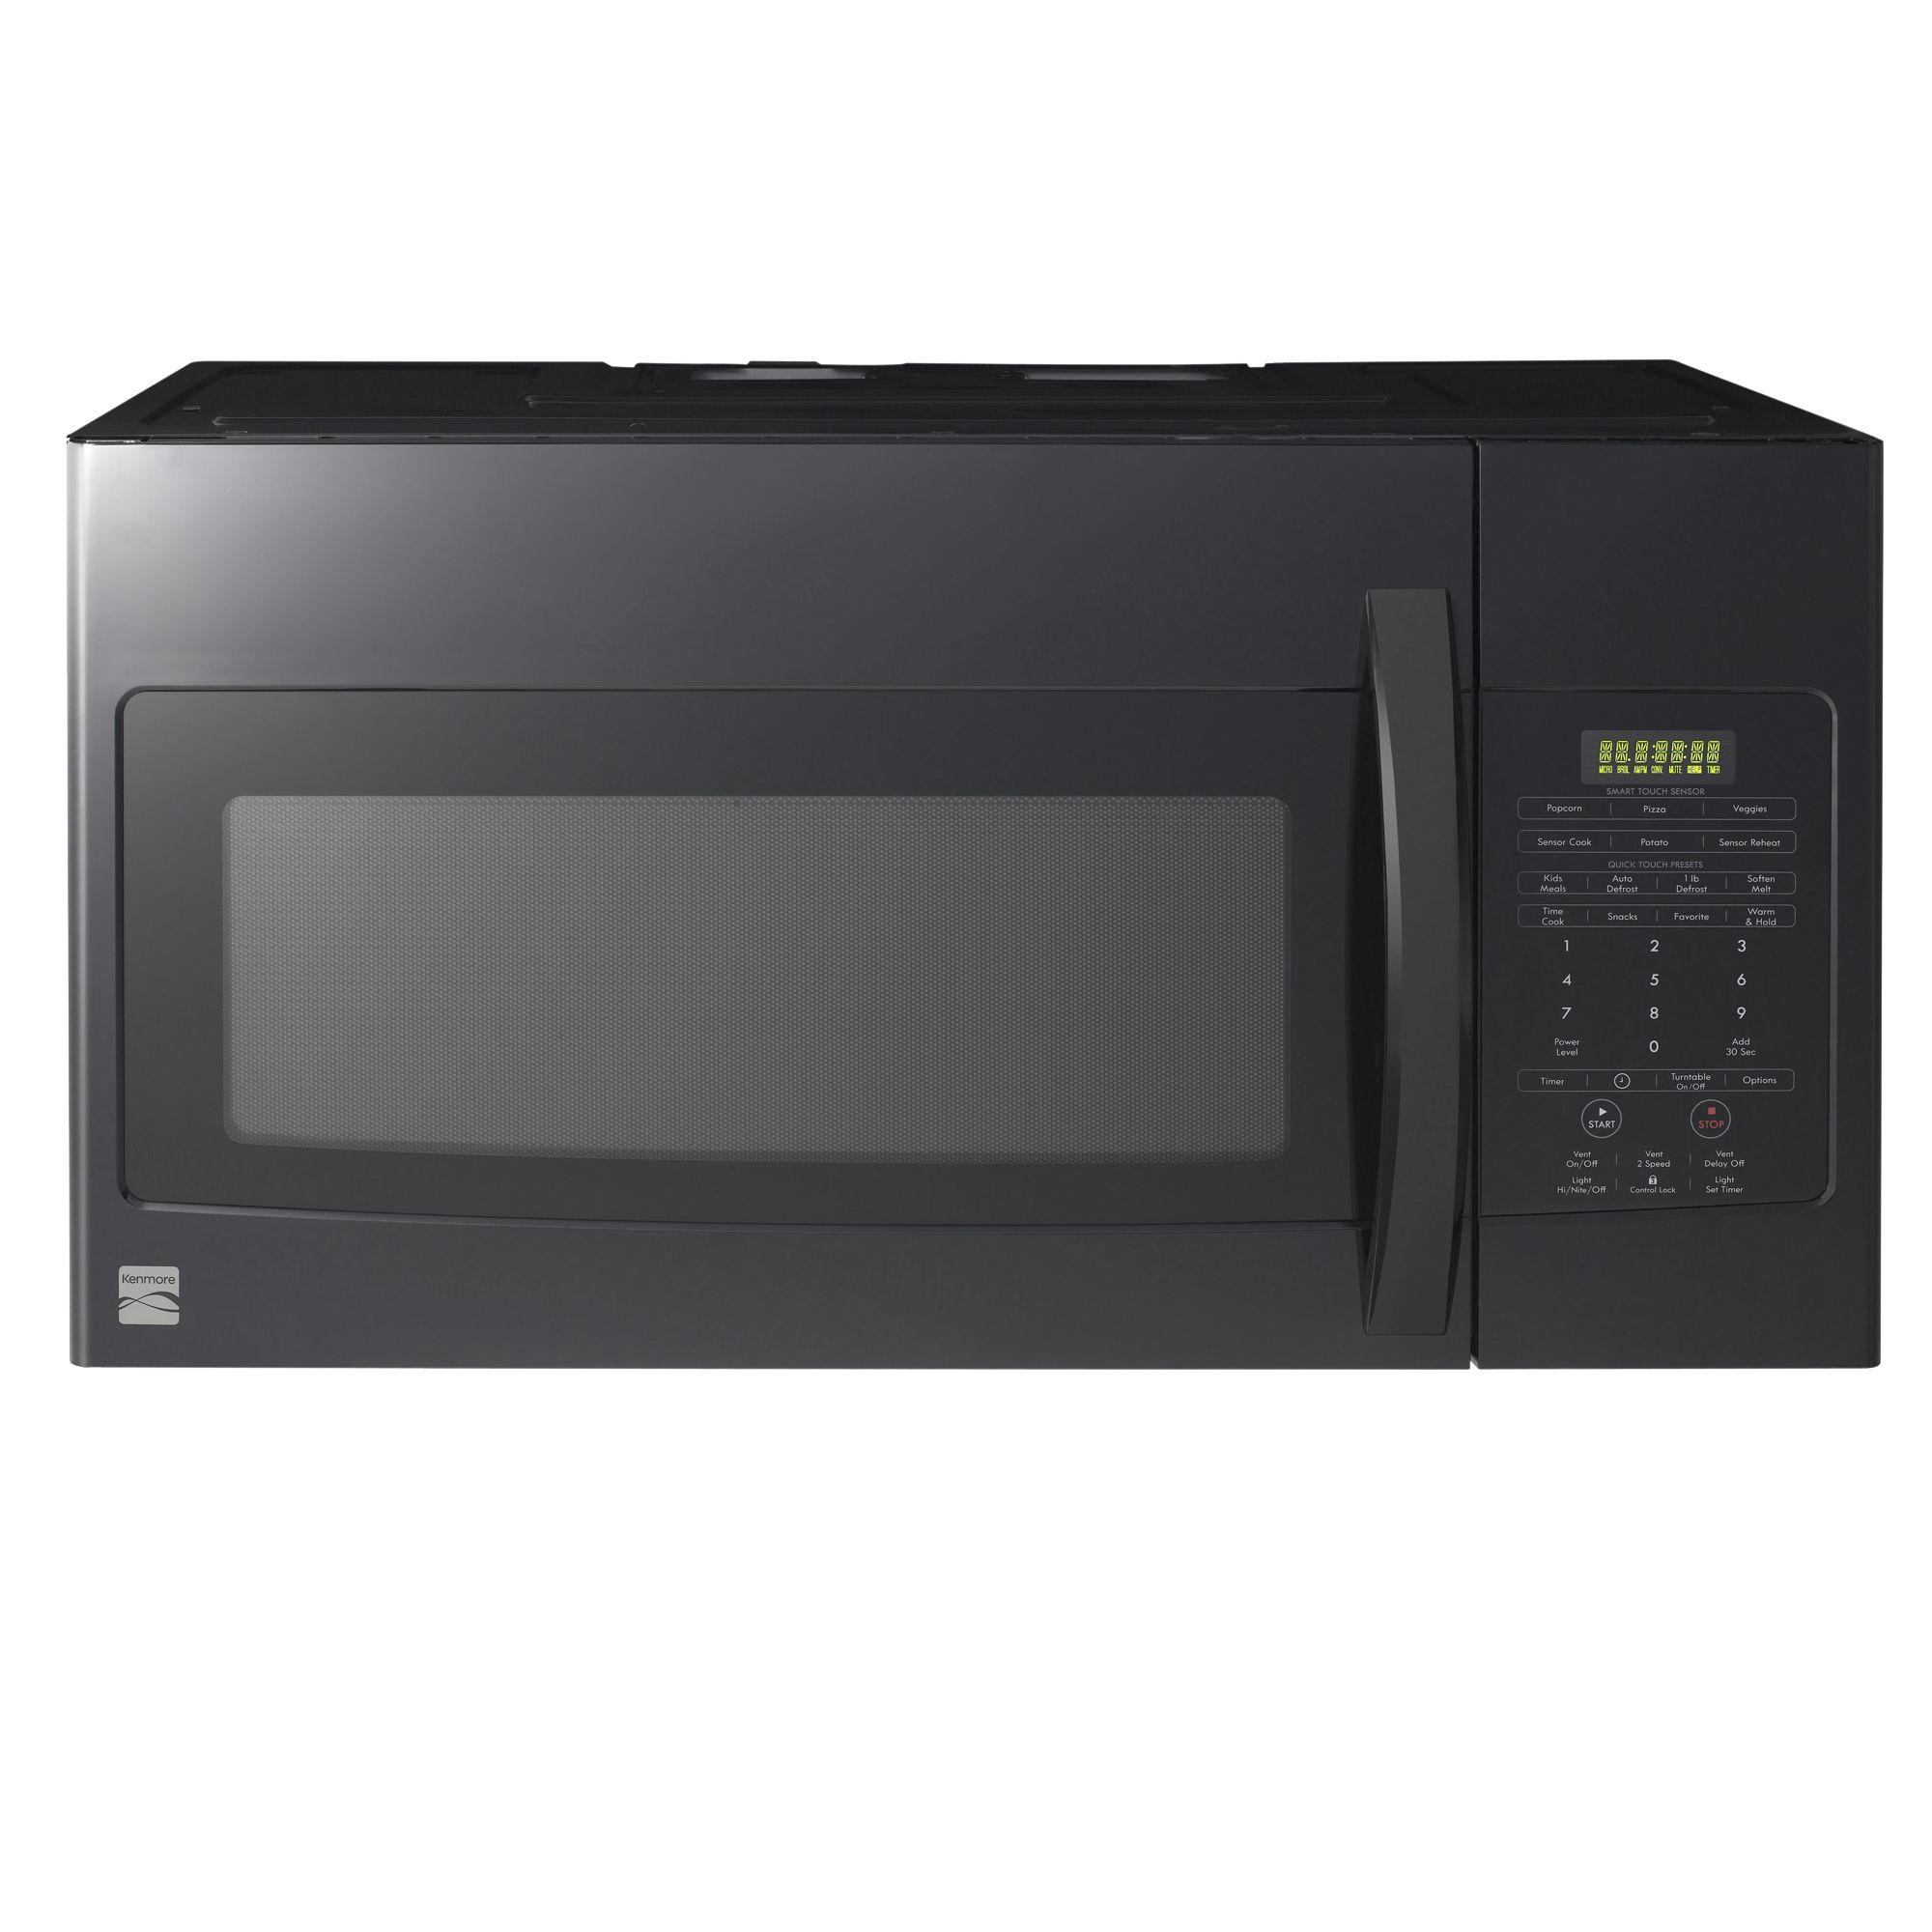 Kenmore 85049 1.7 cu. ft. Over-the-Range Microwave Oven - Black